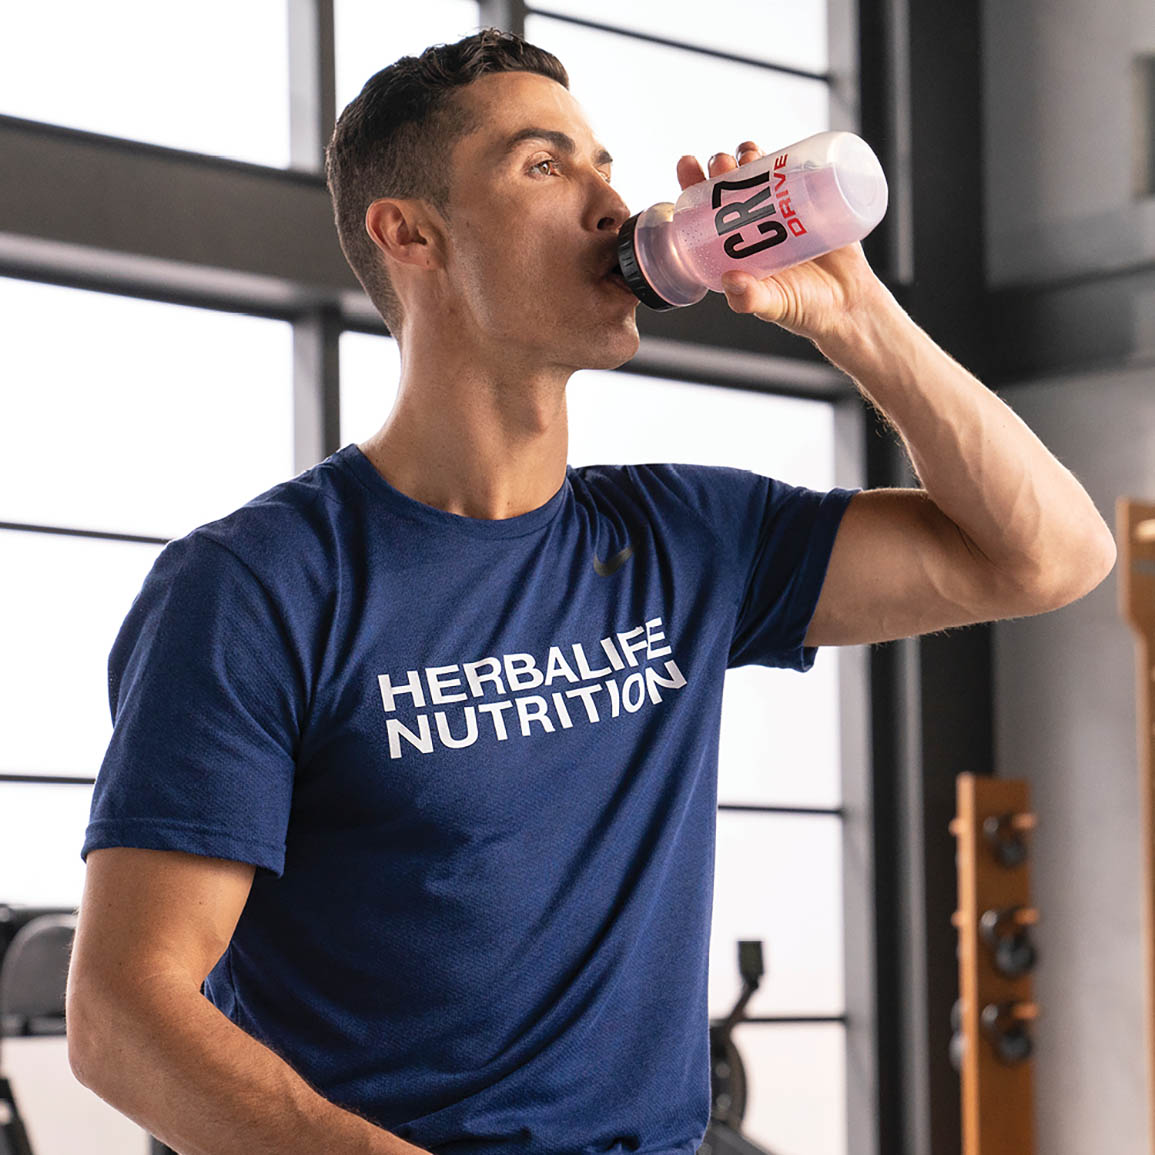 Cristiano Ronaldo Drinking Cr7 Drive With A Herbalife Nutrition T-Shirt On